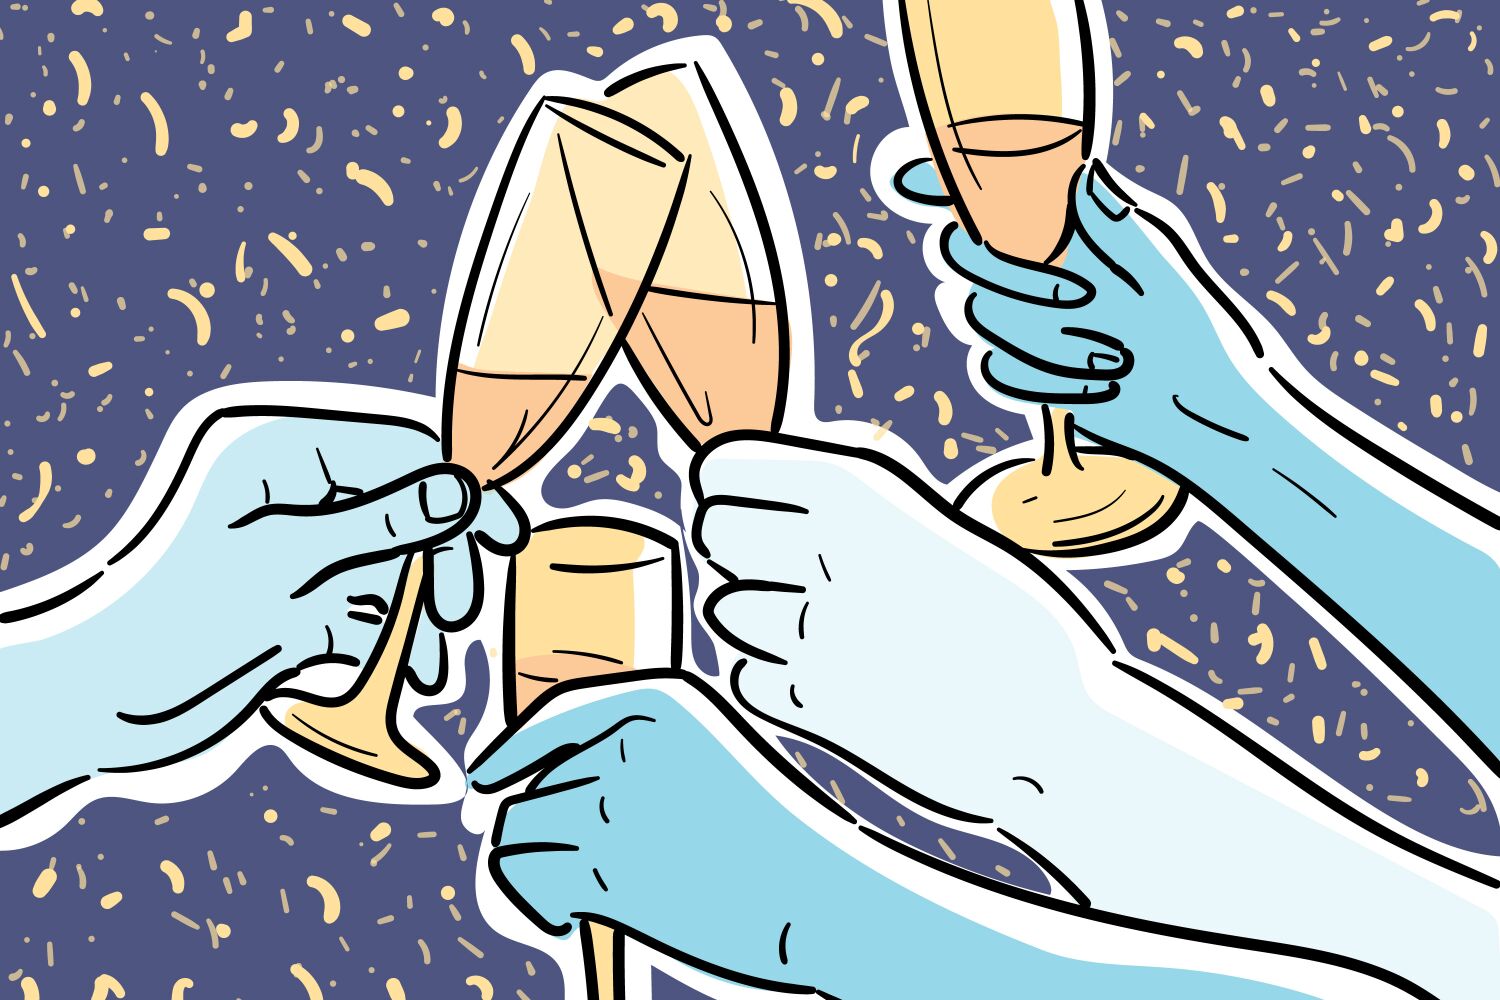 Op-Comic: Here's to New Year's resolutions that are made to be broken 